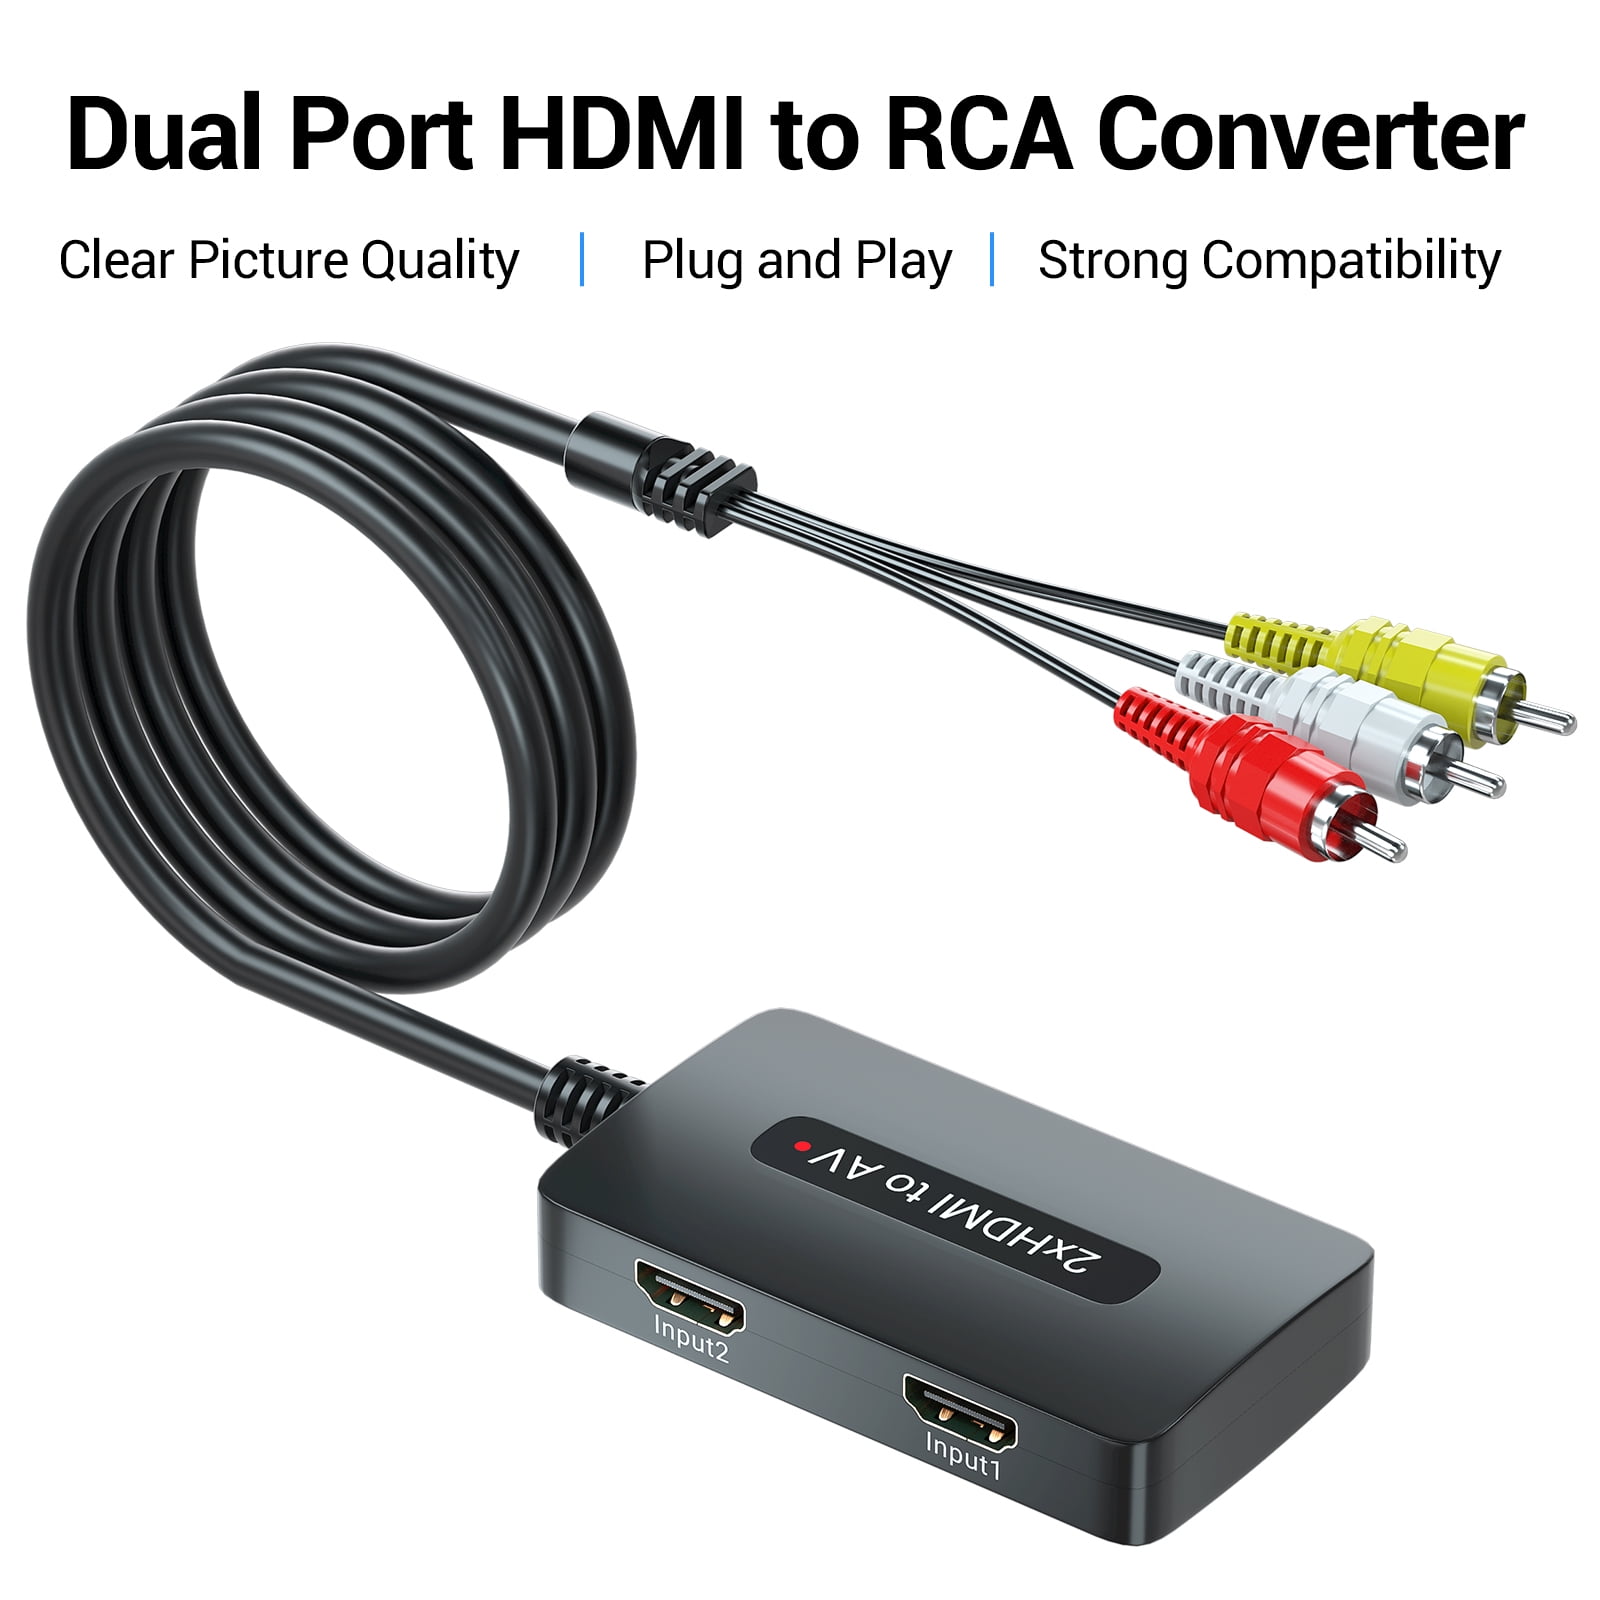 Two Port HDMI to RCA Converter, 2 Port HDMI to AV, Dual Port Composite CVBS  for HDMI Devices to Display on Old TVs, HDMI RCA Adapter